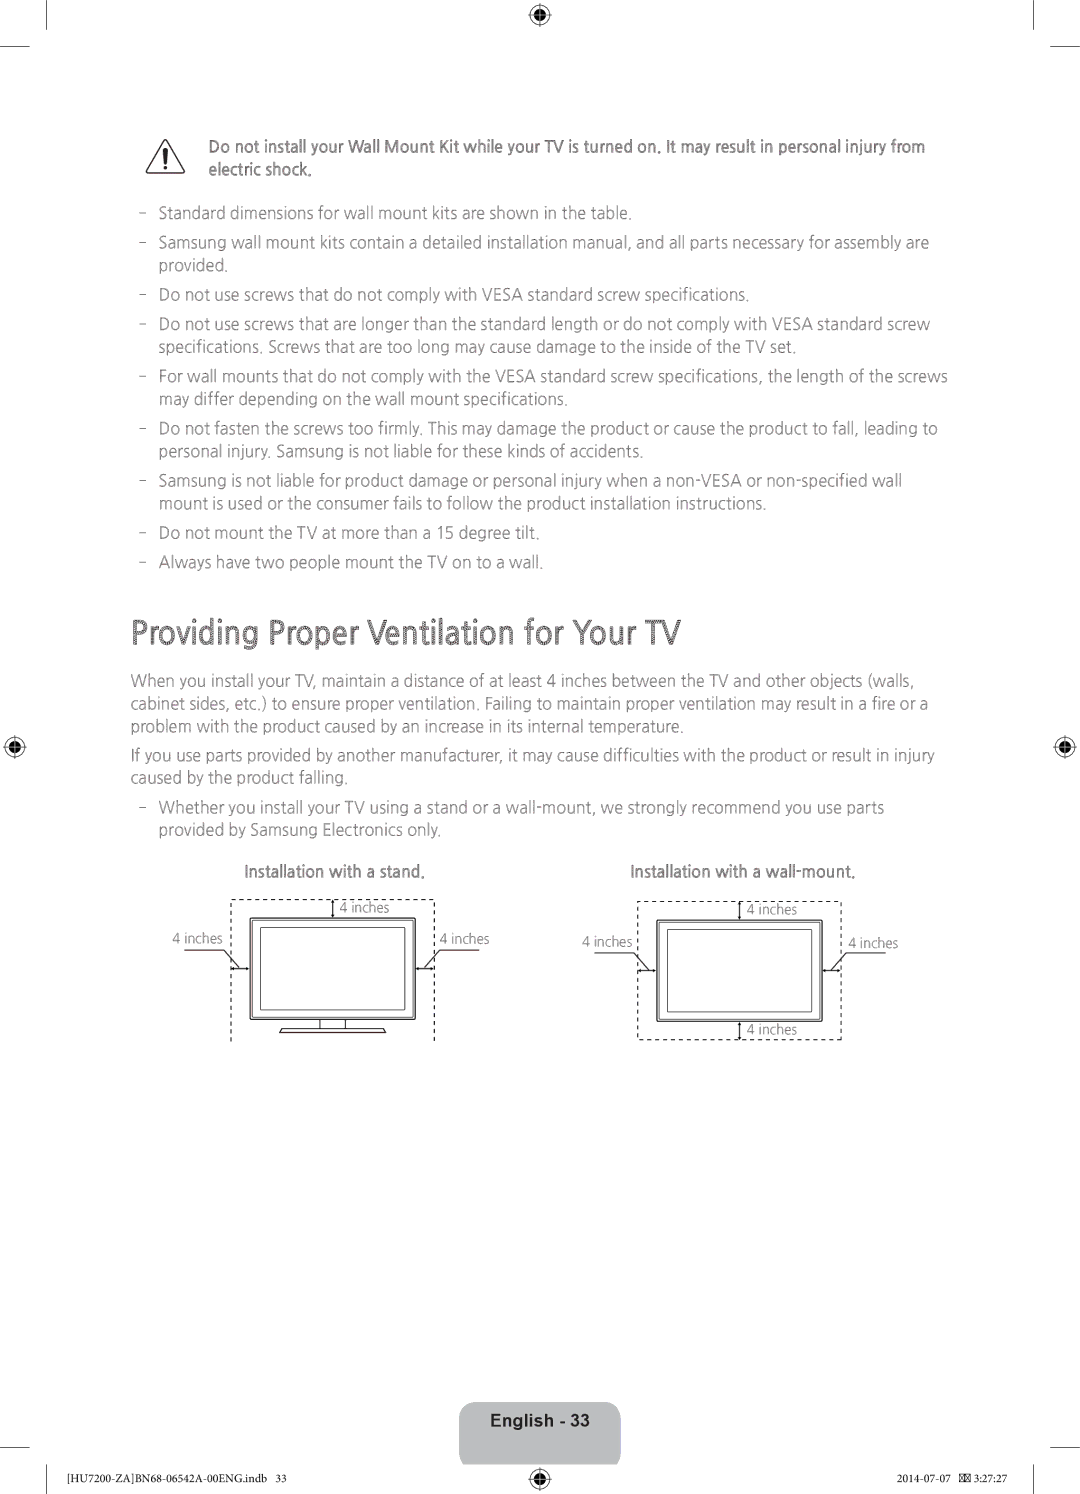 Samsung UN65HU7250 user manual Providing Proper Ventilation for Your TV, Installation with a stand 